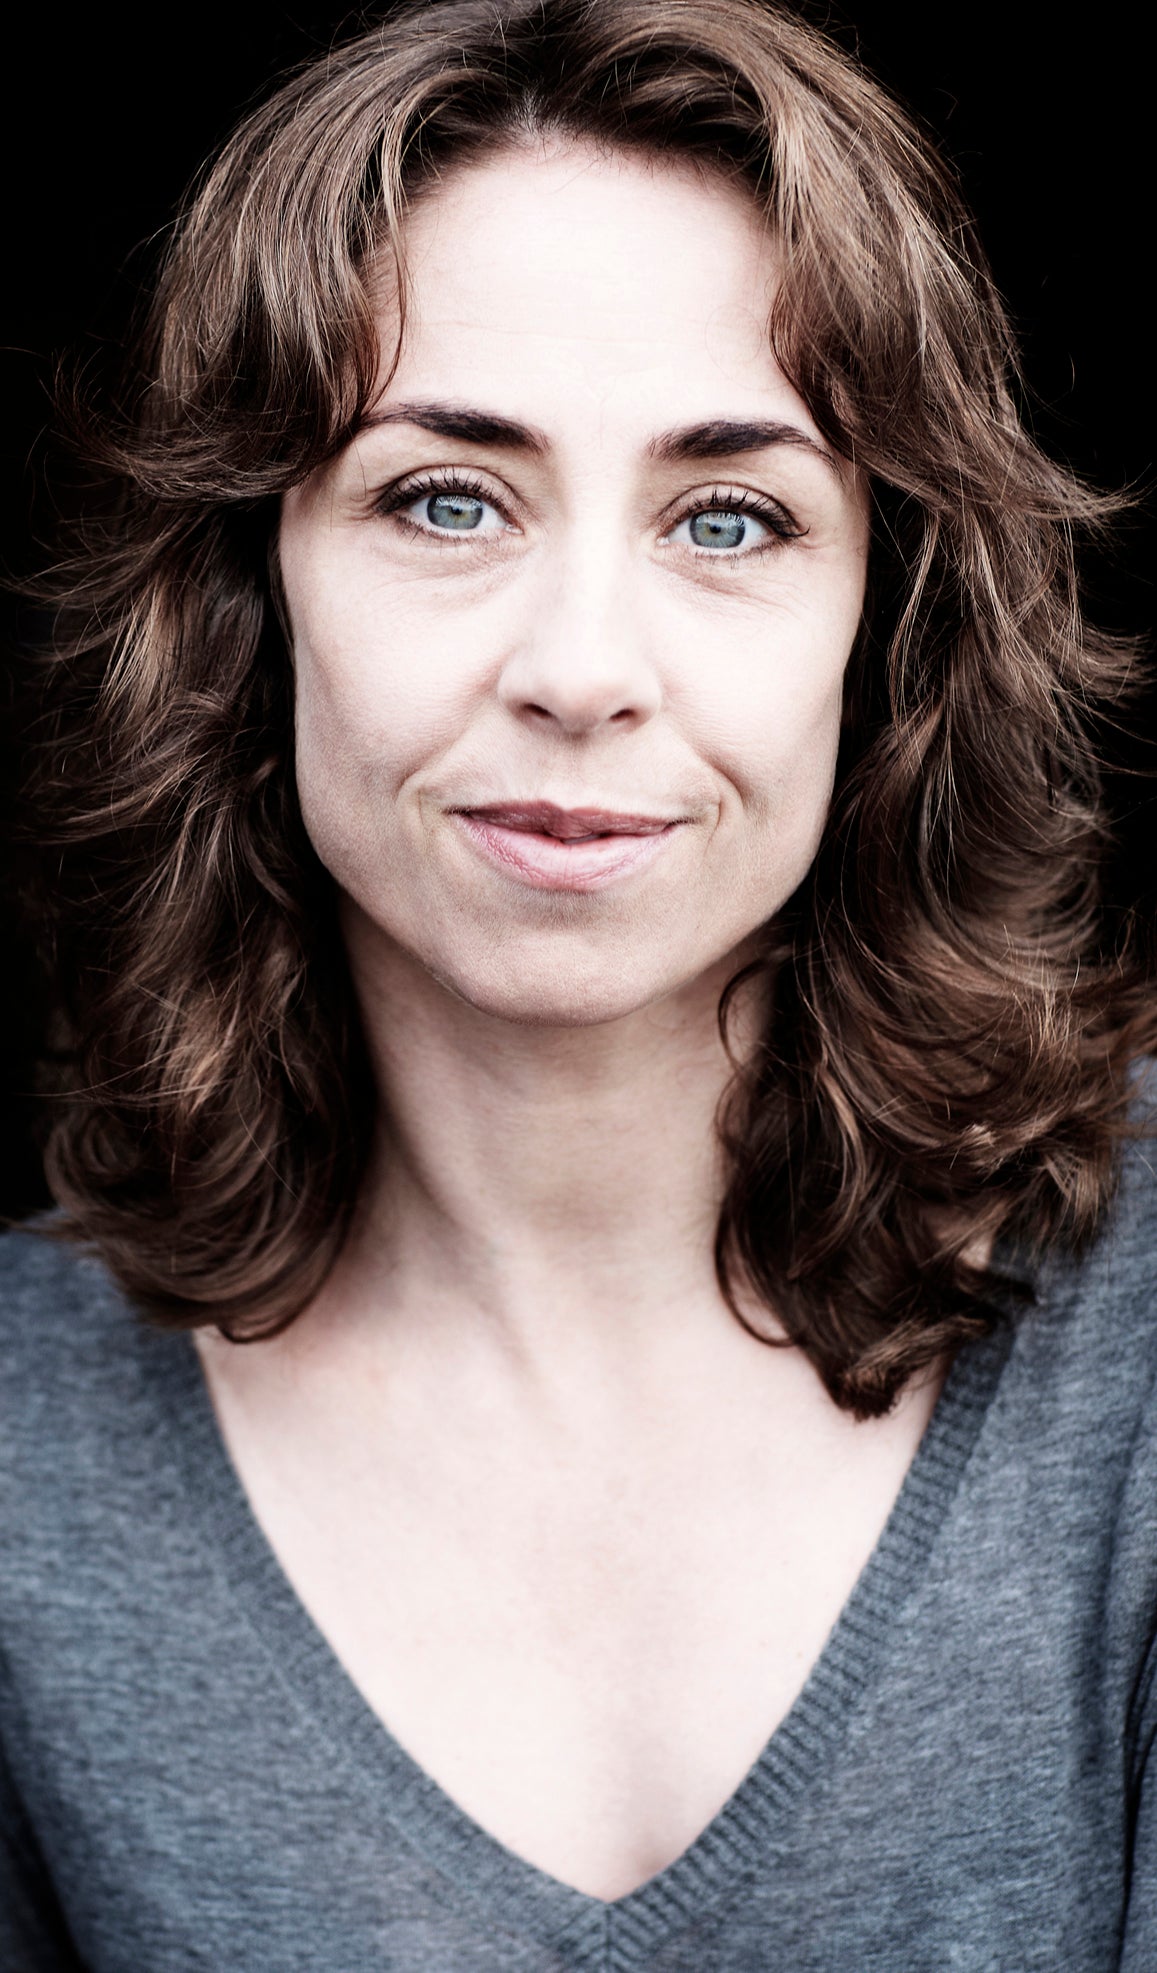 Sofie Grabol, aka Sarah Lund, plays Queen Margaret in the third of these plays about James I, II and III of Scotland